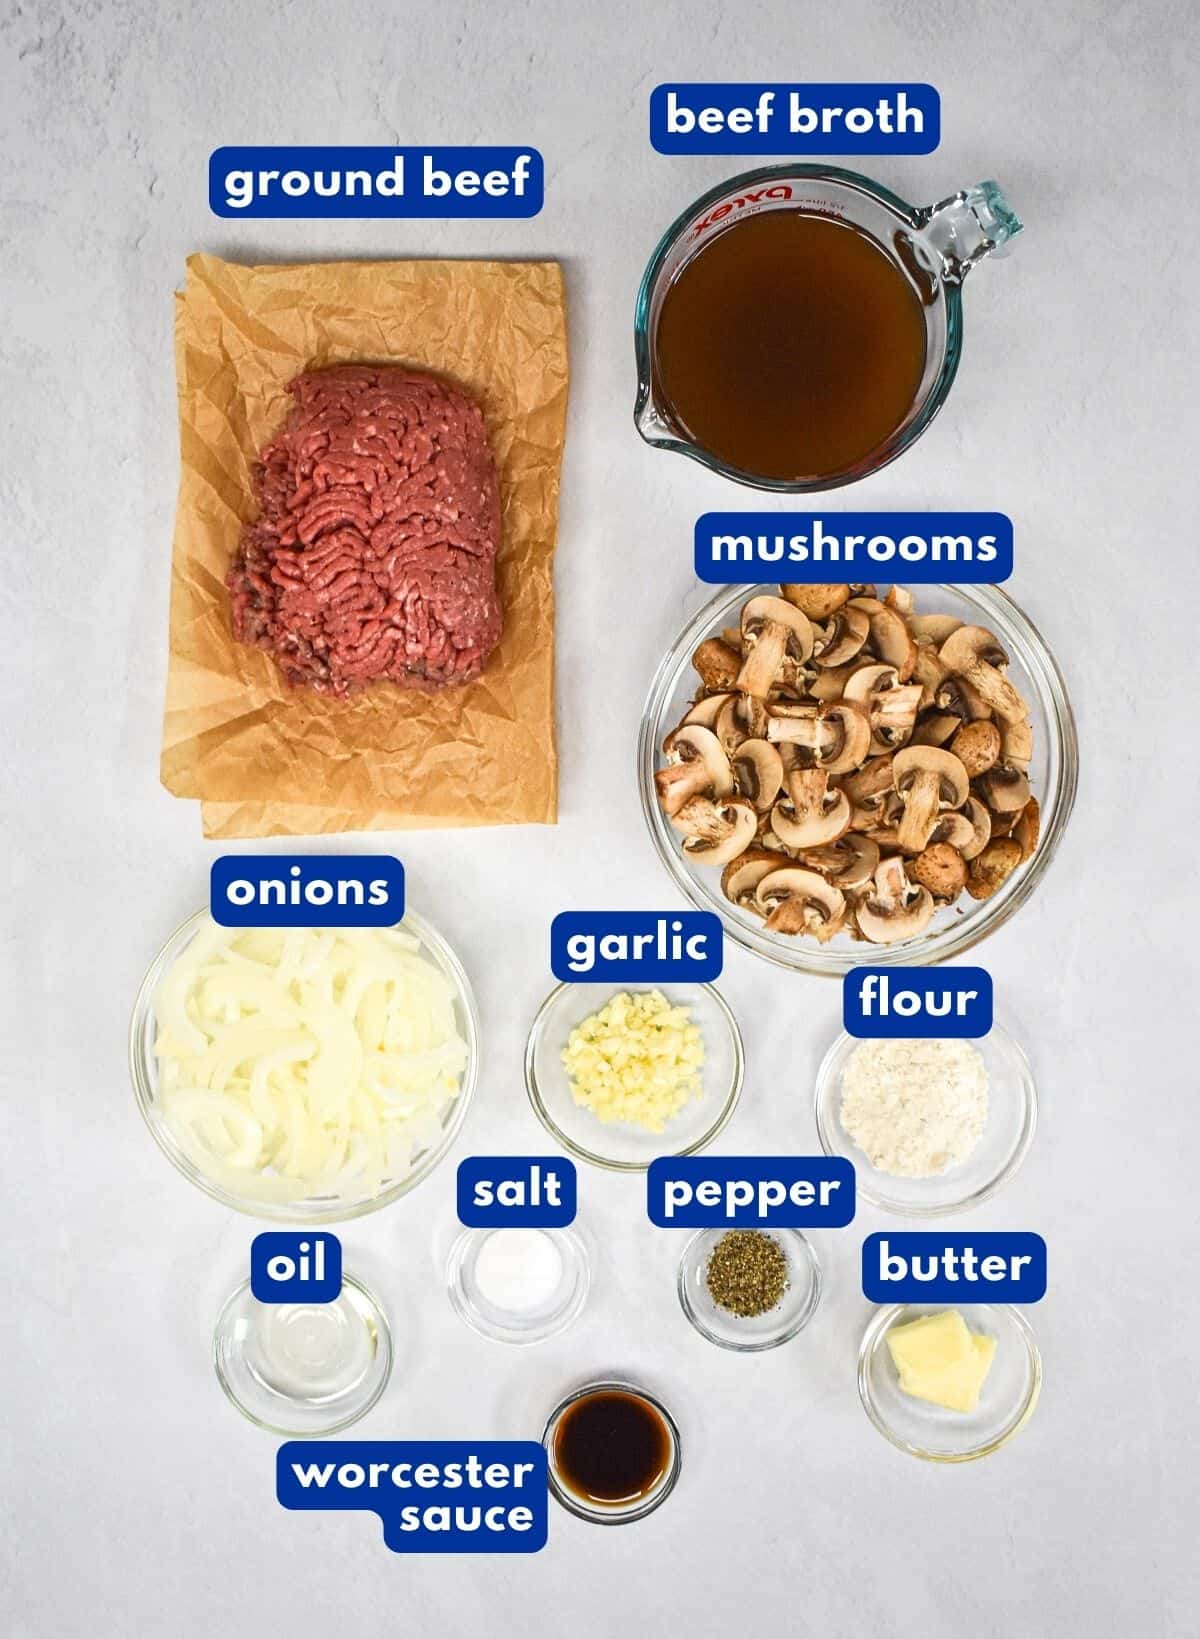 The ingredients for the ground beef and mushrooms prepped and arranged on a white table with each labeled in blue and white letters.